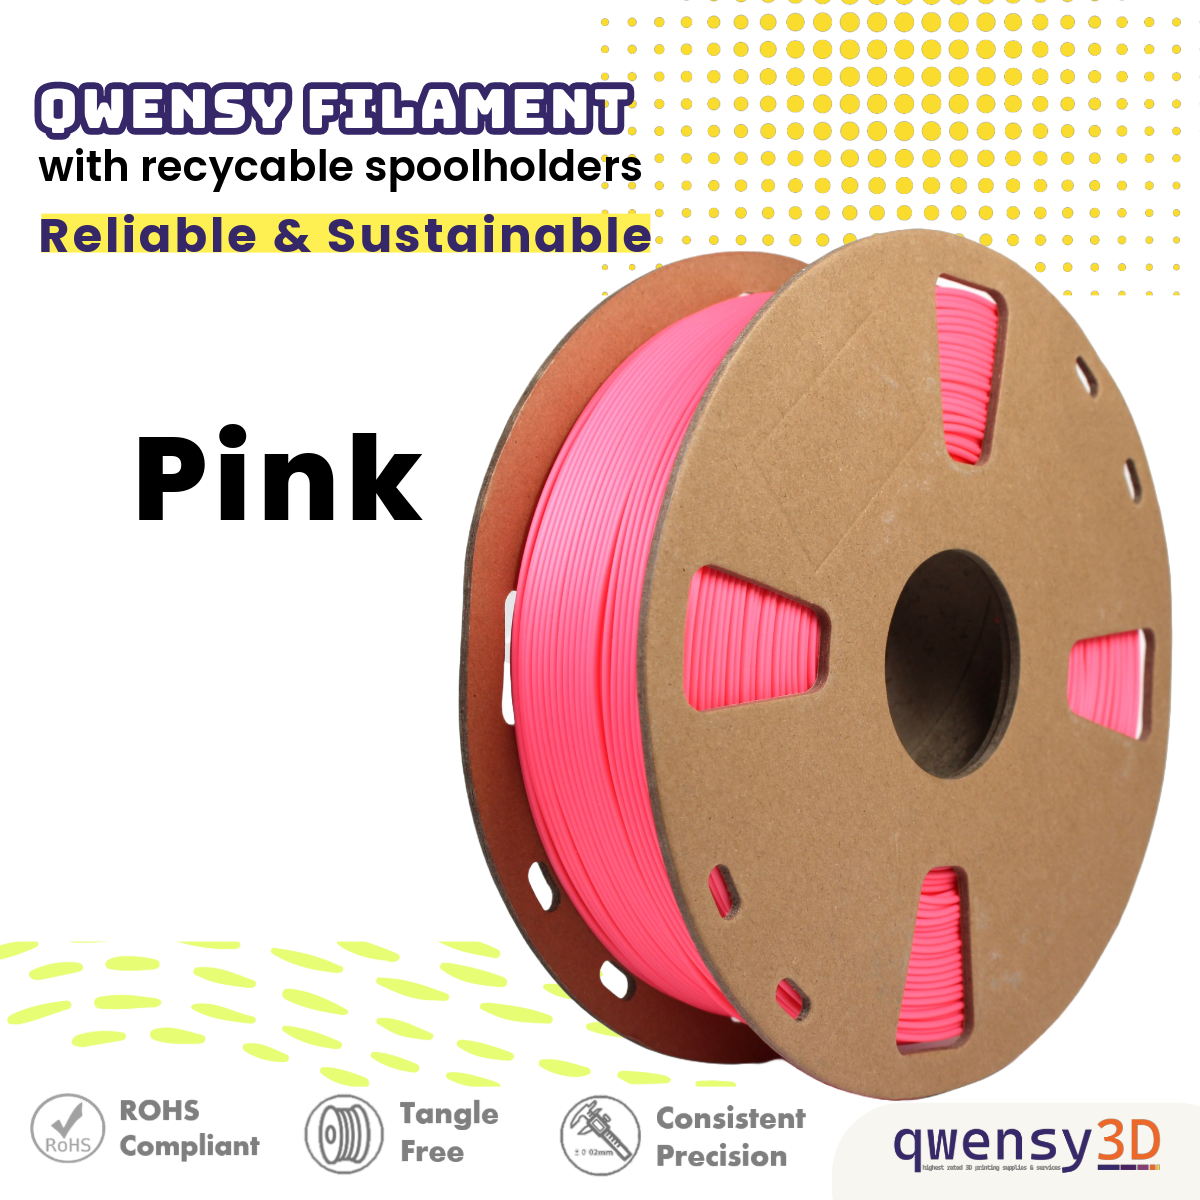 qwensy PLA Filaments: Reliable and Sustainable Filament for High-Quality 3D Prints